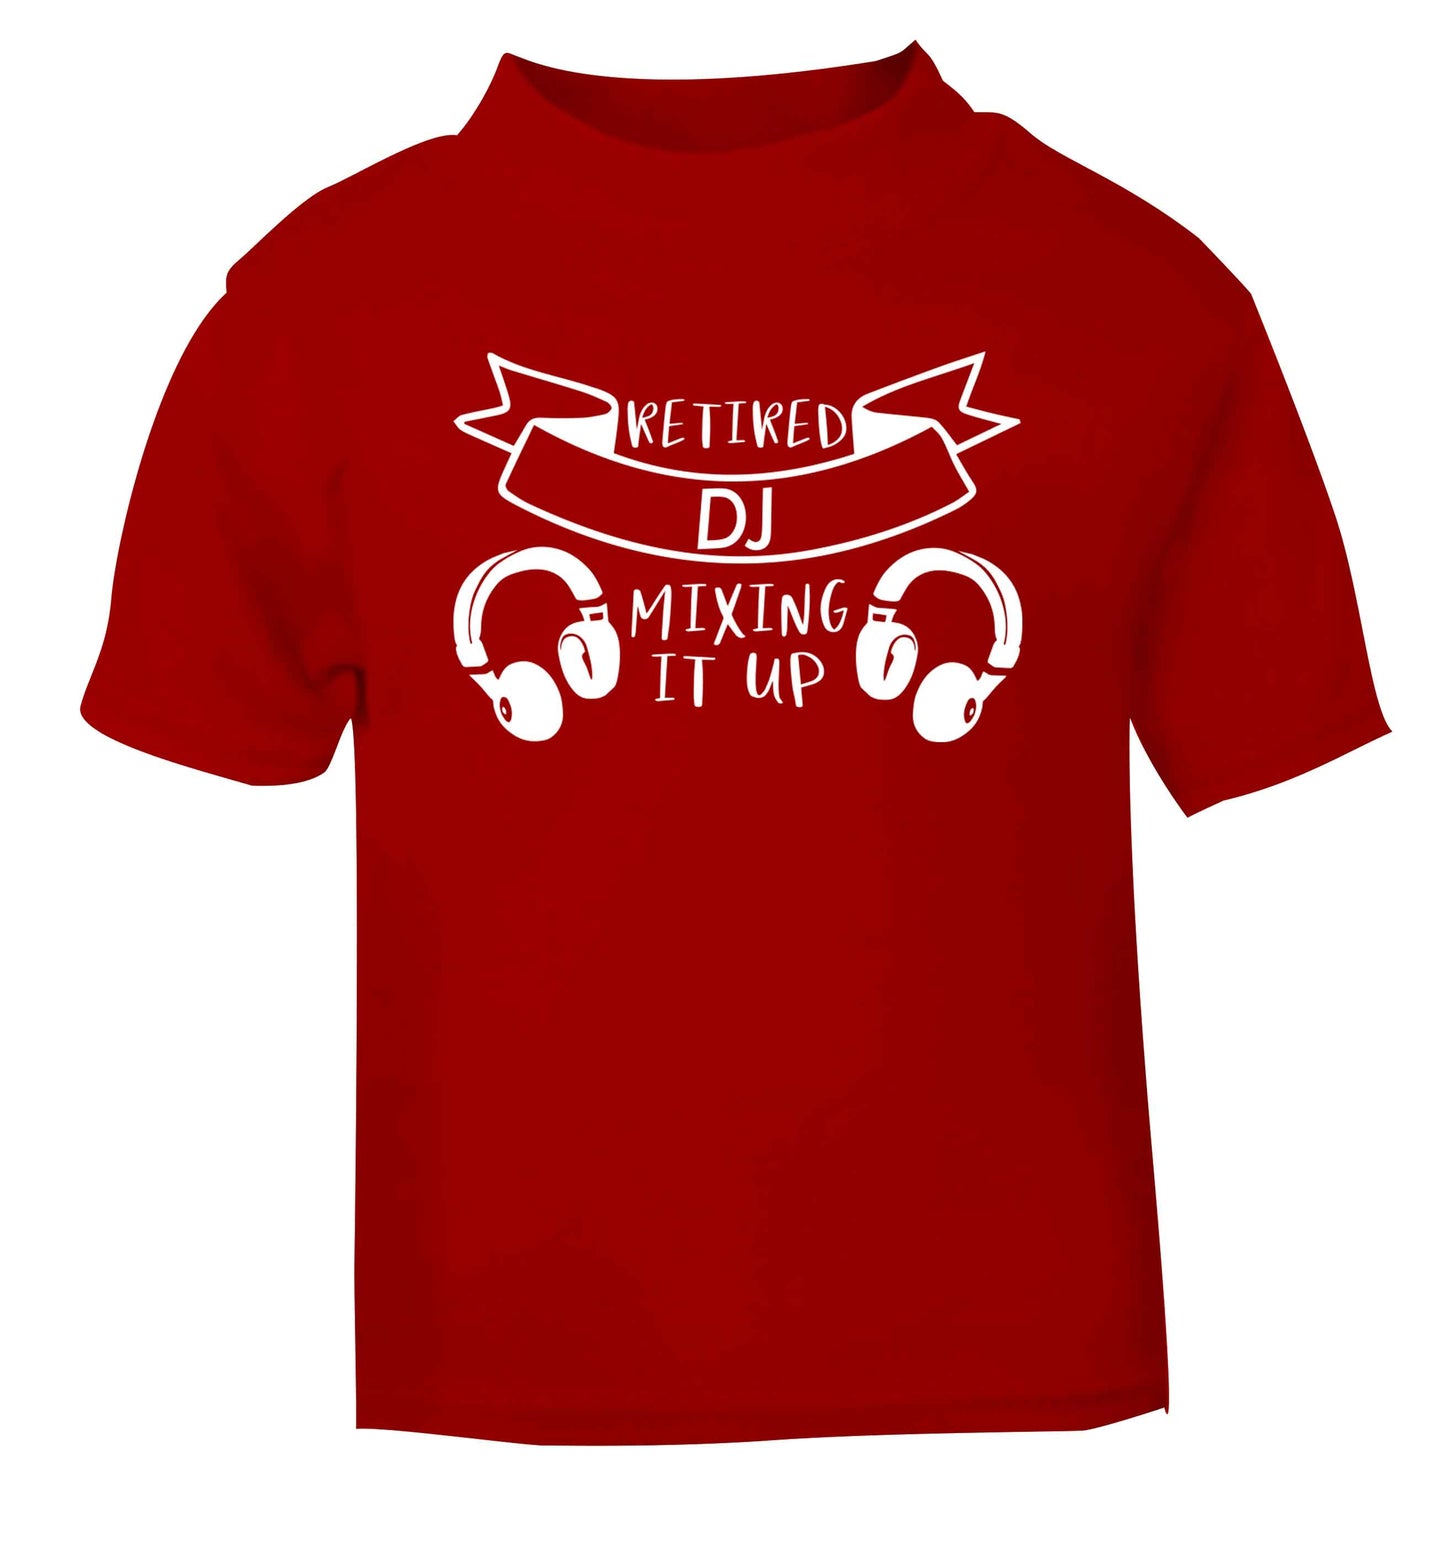 Retired DJ mixing it up red Baby Toddler Tshirt 2 Years